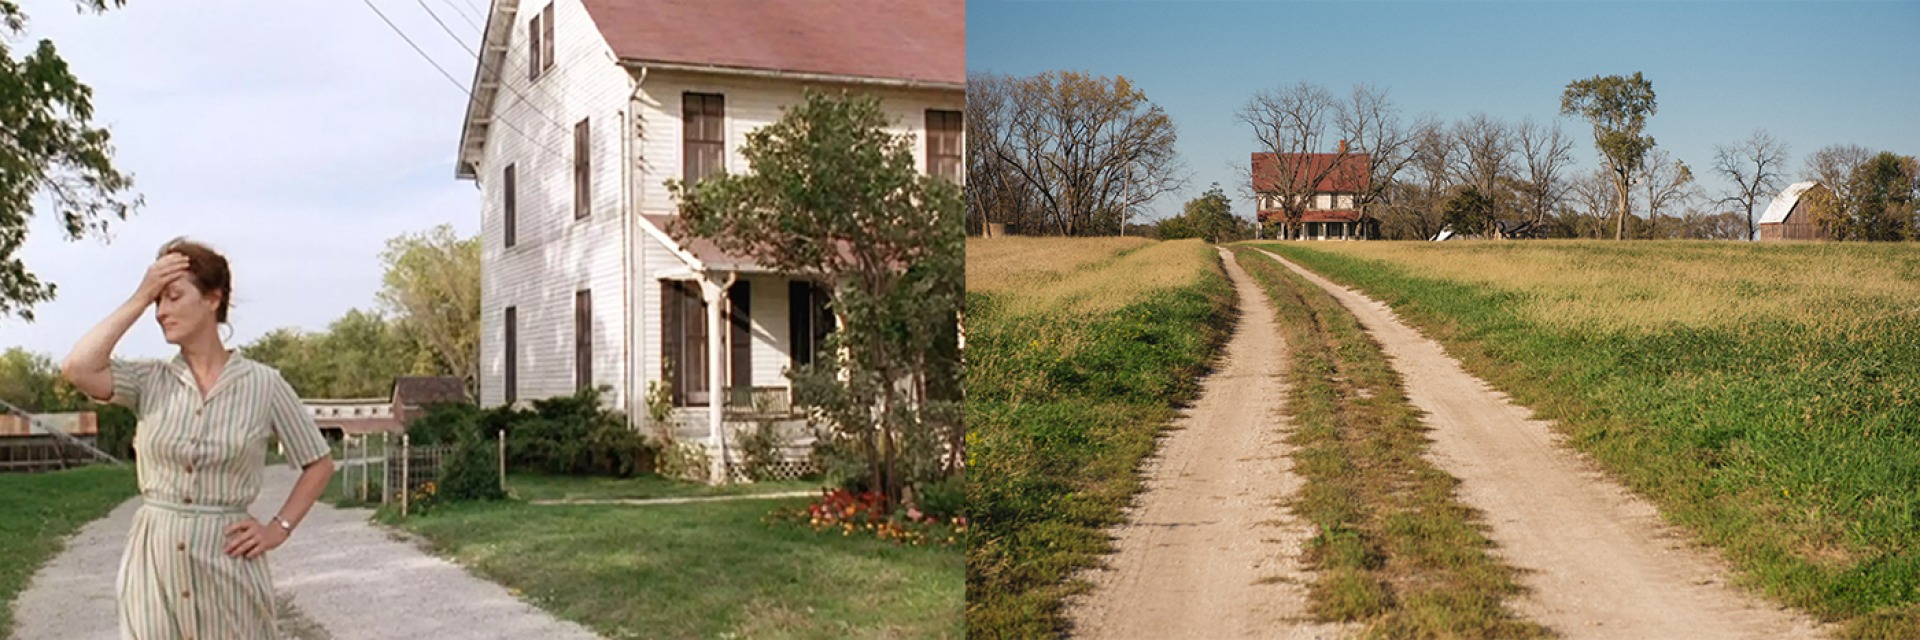 Farmhouse in movie The Bridges of Madison County